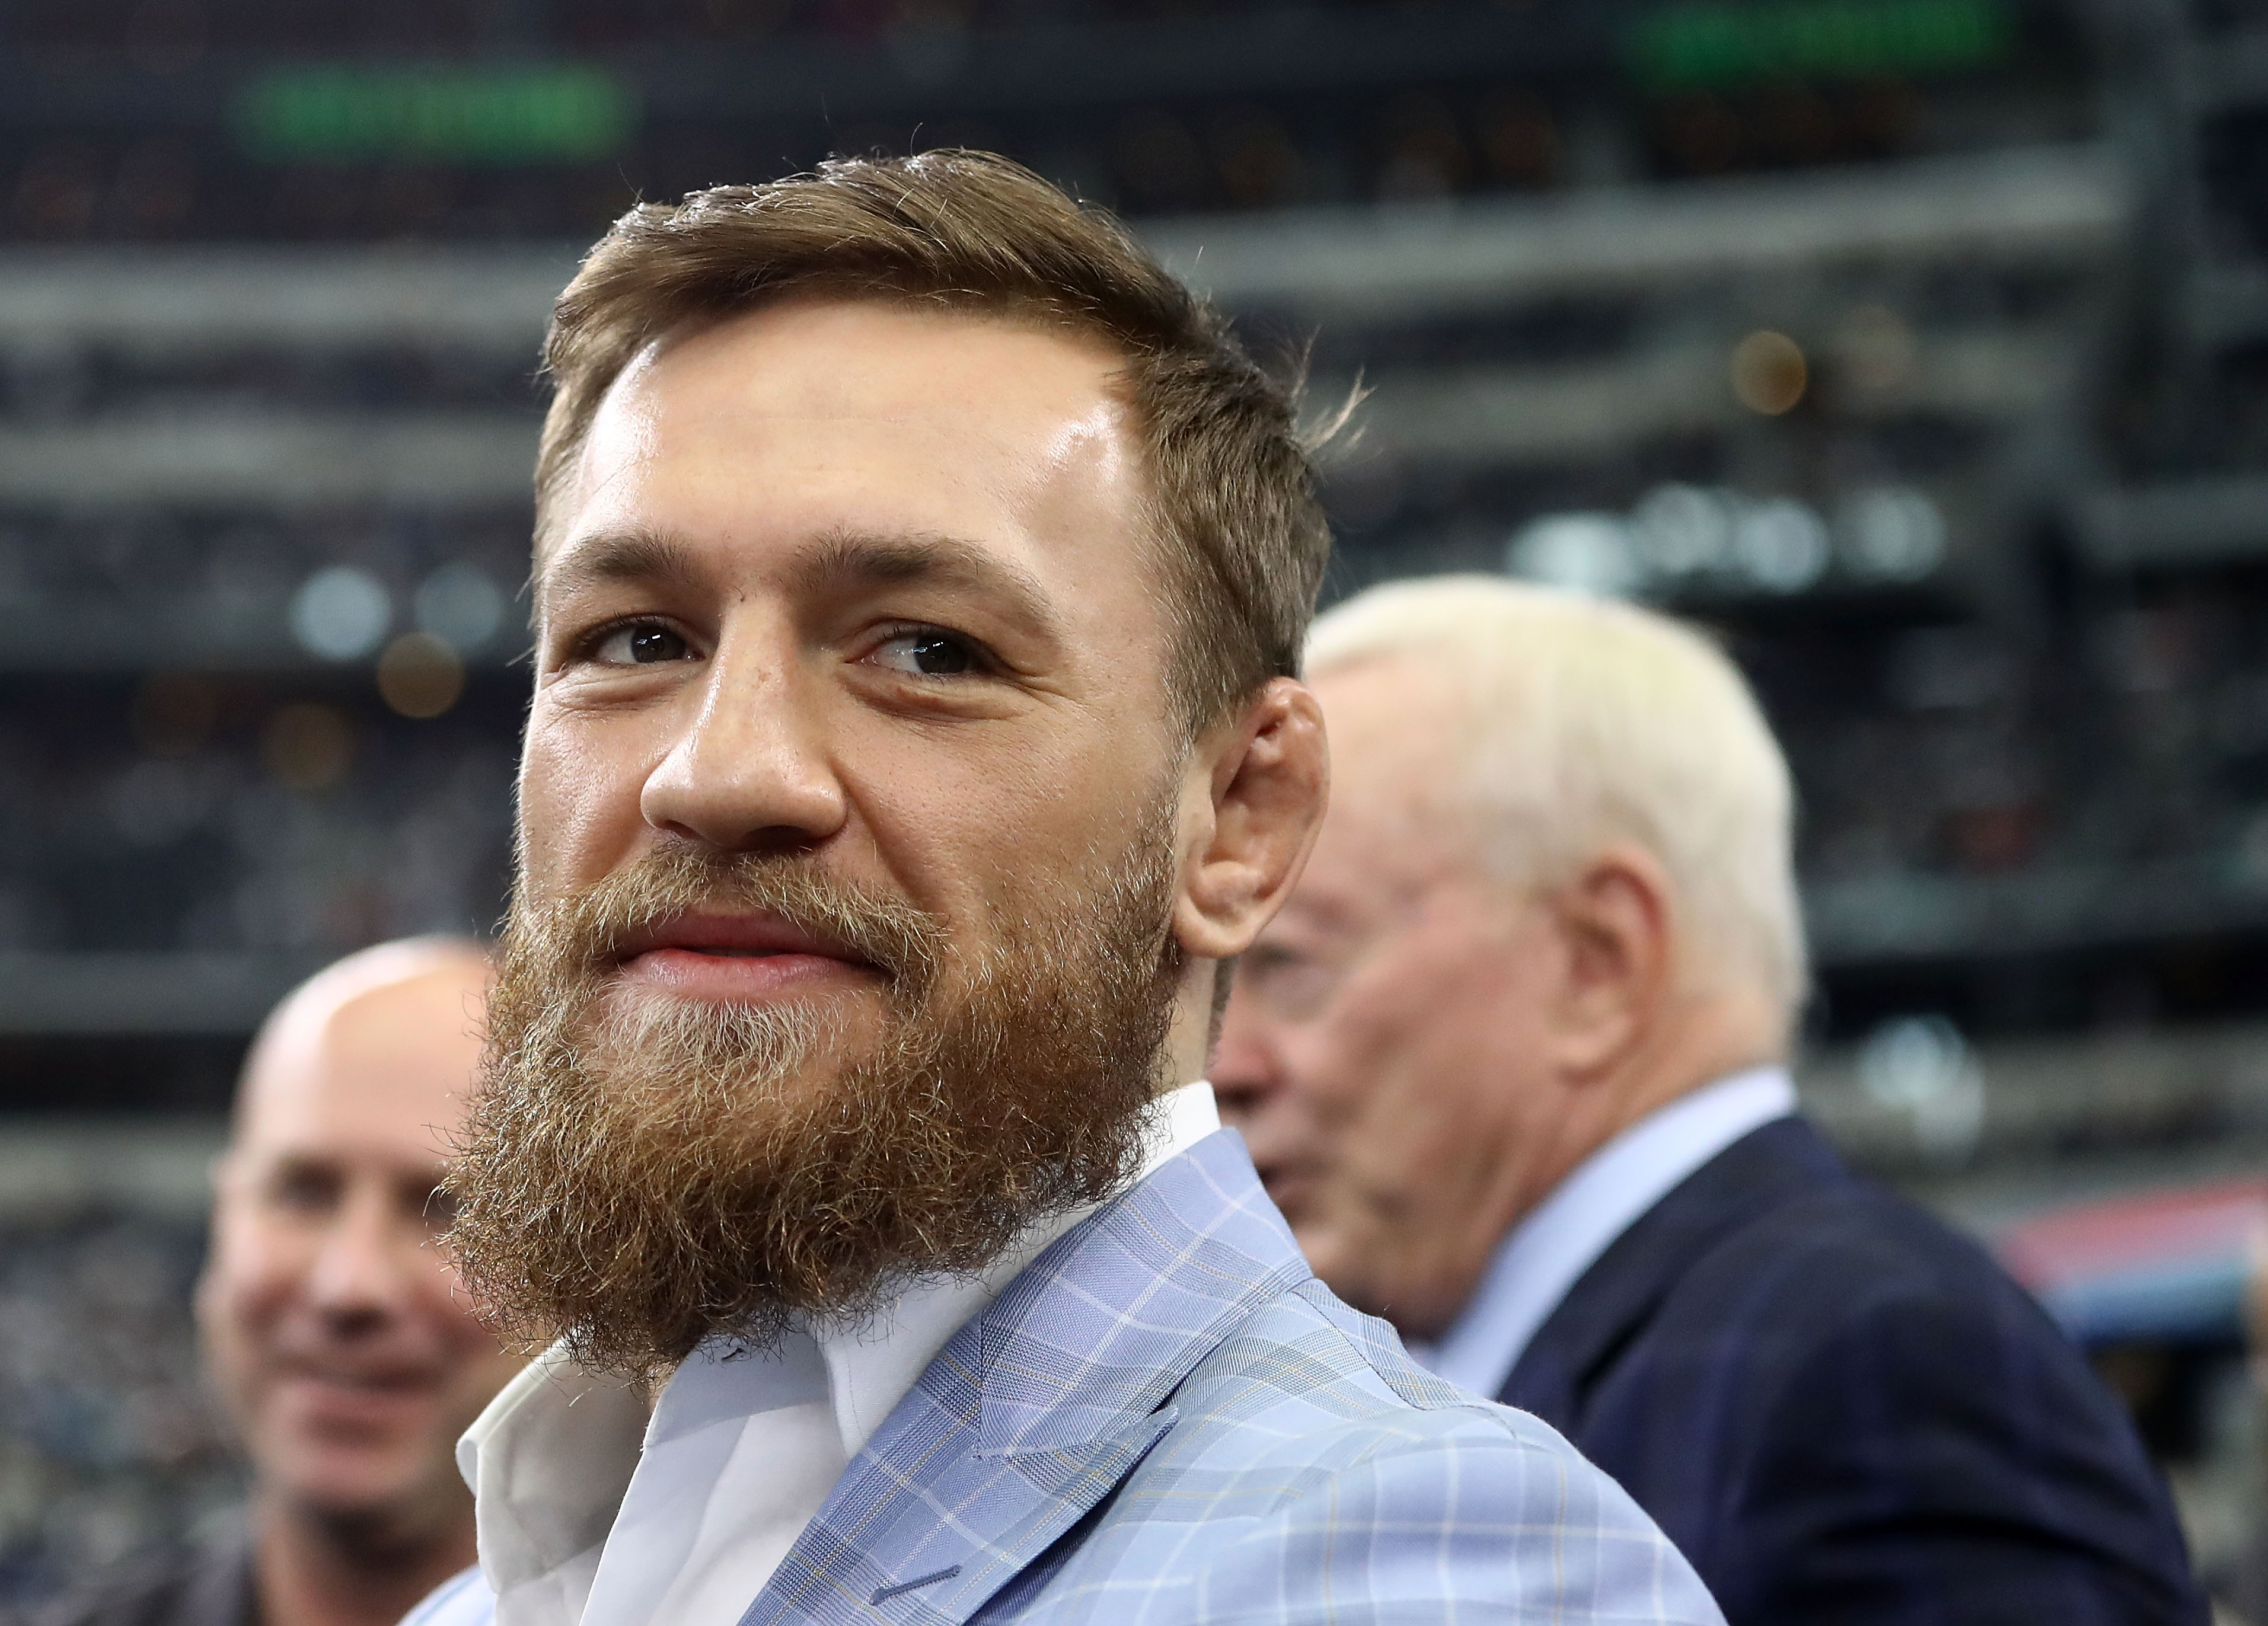 Conor McGregor is seen on the sidelines before the NFL game between the Jacksonville Jaguars and Dallas Cowboys at AT&amp;T Stadium on October 14, 2018 in Arlington, Texas. (Ronald Martinez—Getty Images)